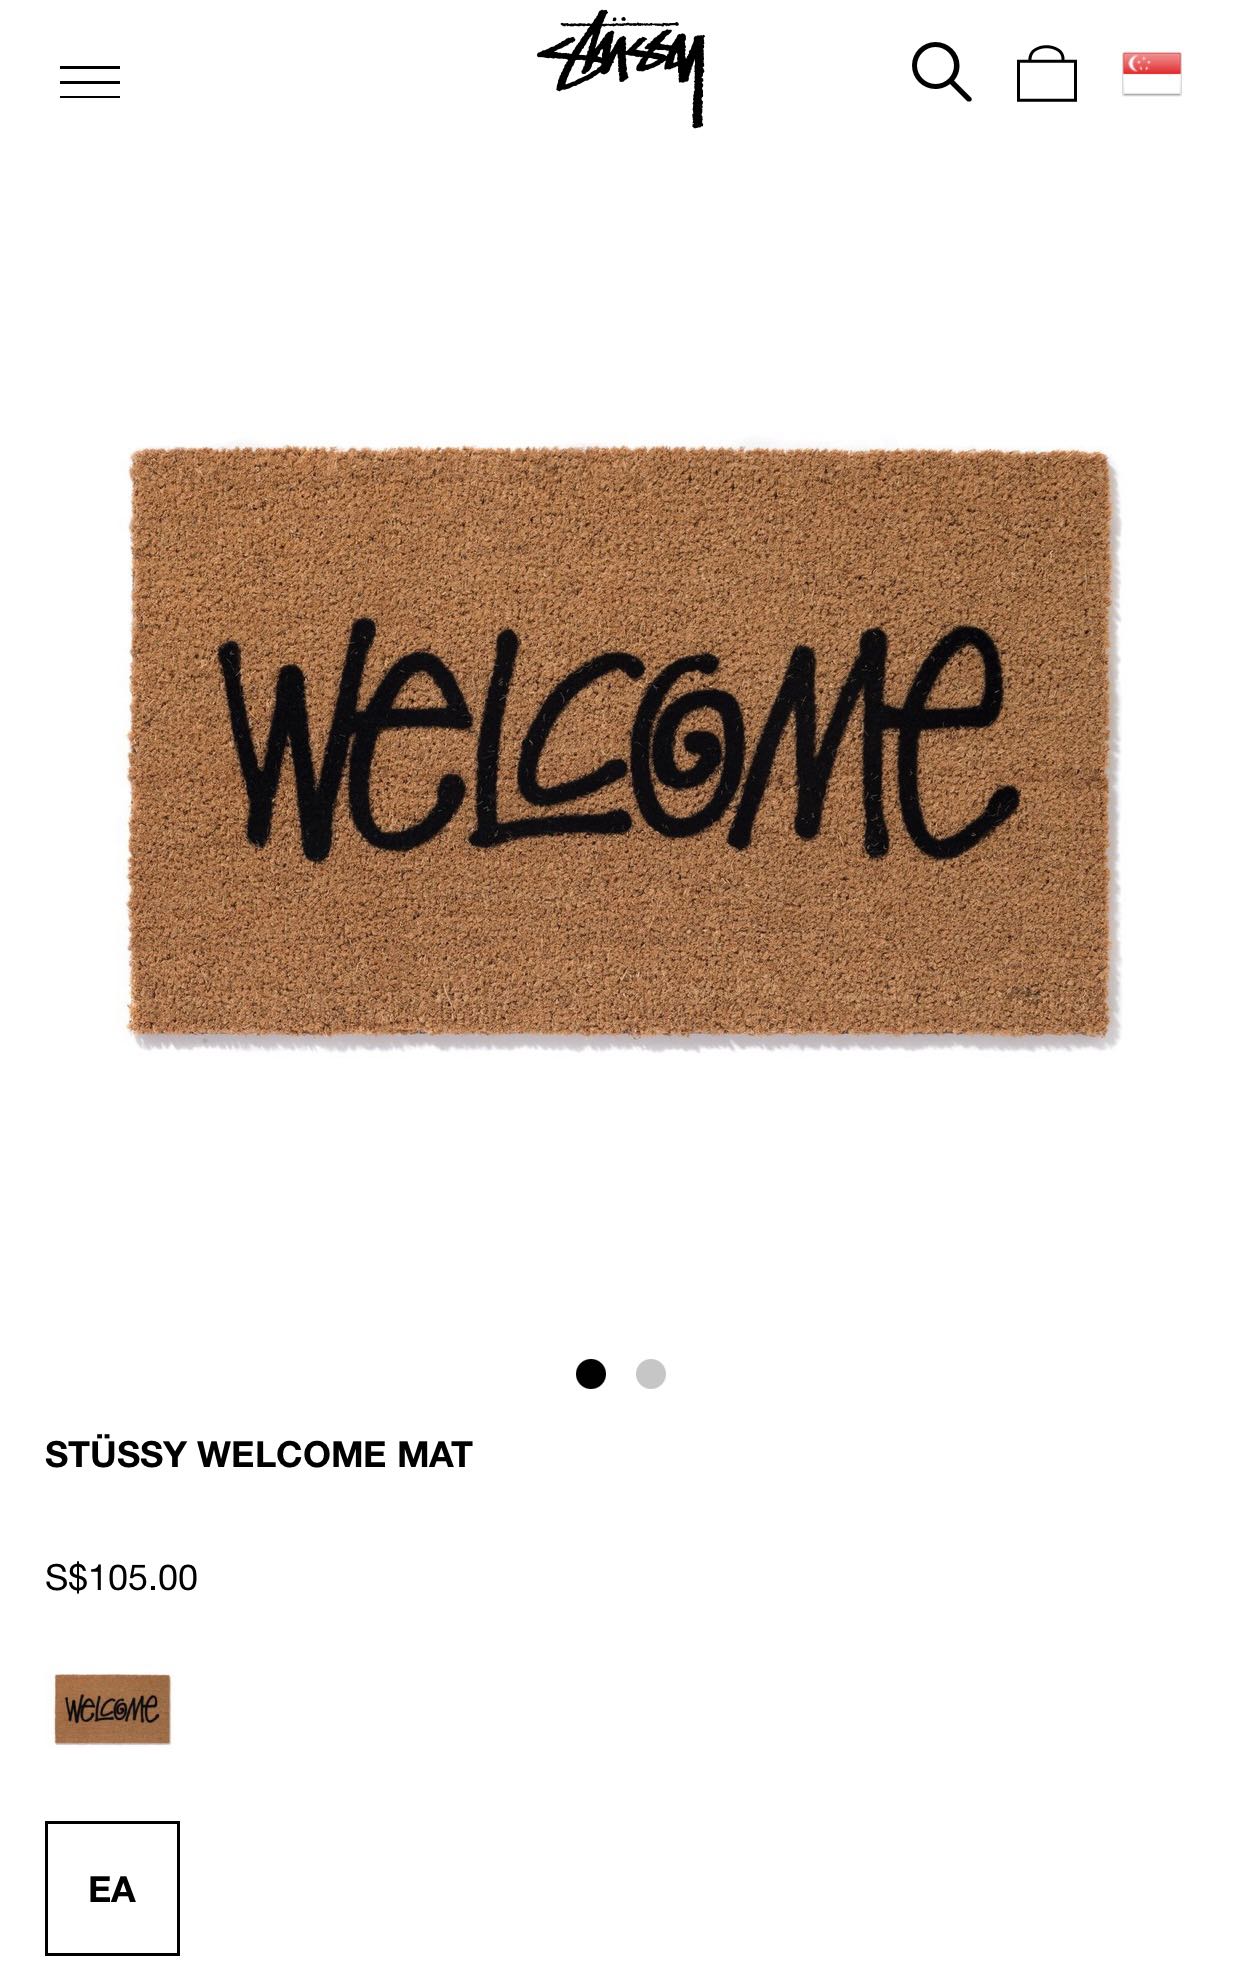 https://media.karousell.com/media/photos/products/2021/6/27/stussy_welcome_mat_1624785635_49e3f6be.jpg